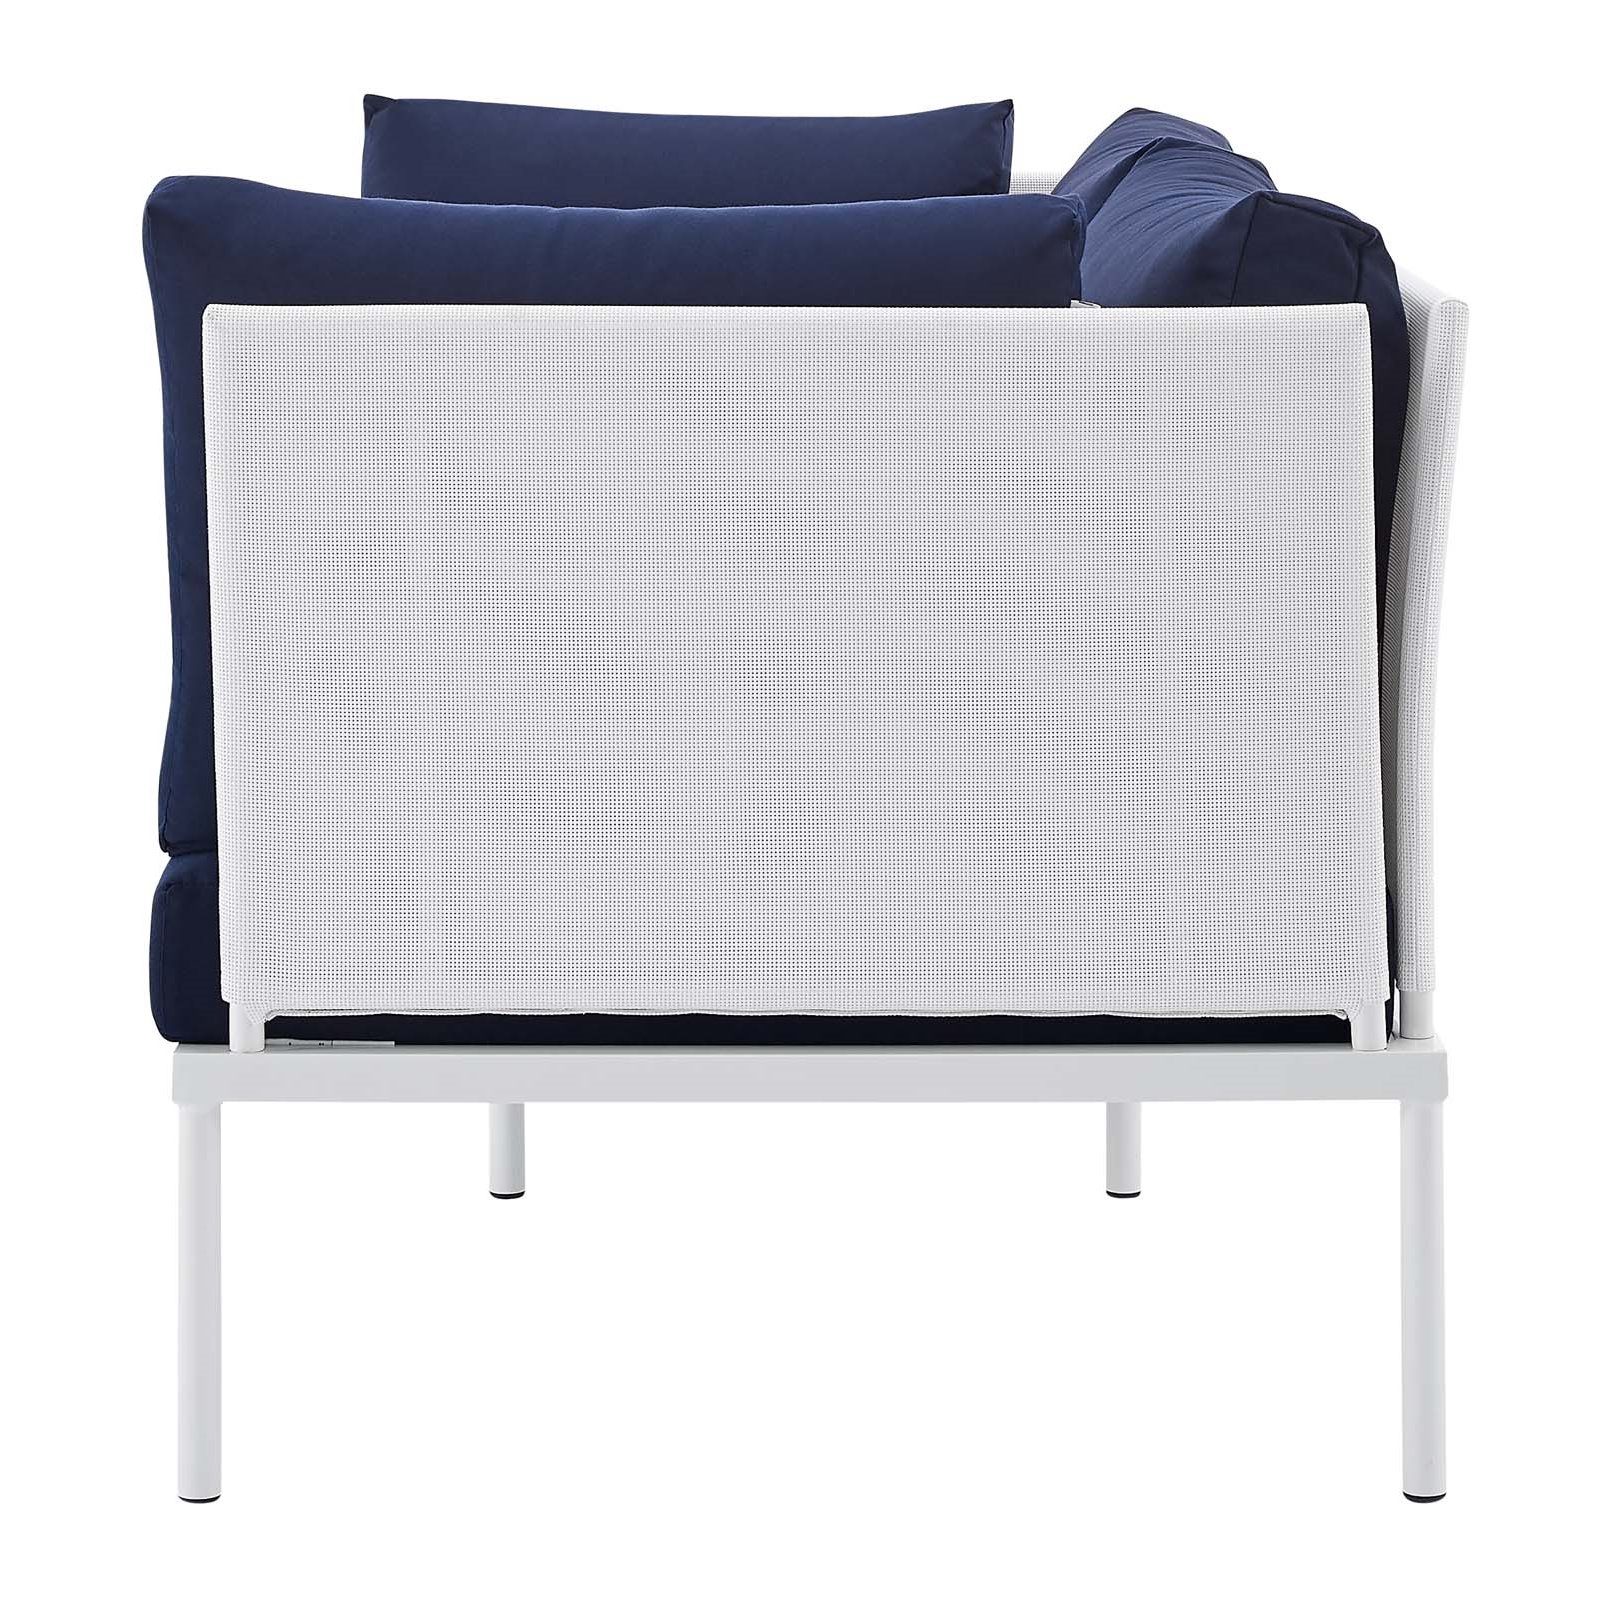 Lounge Sectional Sofa Chair Table Set, Sunbrella, Aluminum, Metal, Steel, White Blue Navy, Modern Contemporary Urban Design, Outdoor Patio Balcony Cafe Bistro Garden Furniture Hotel Hospitality - image 4 of 10